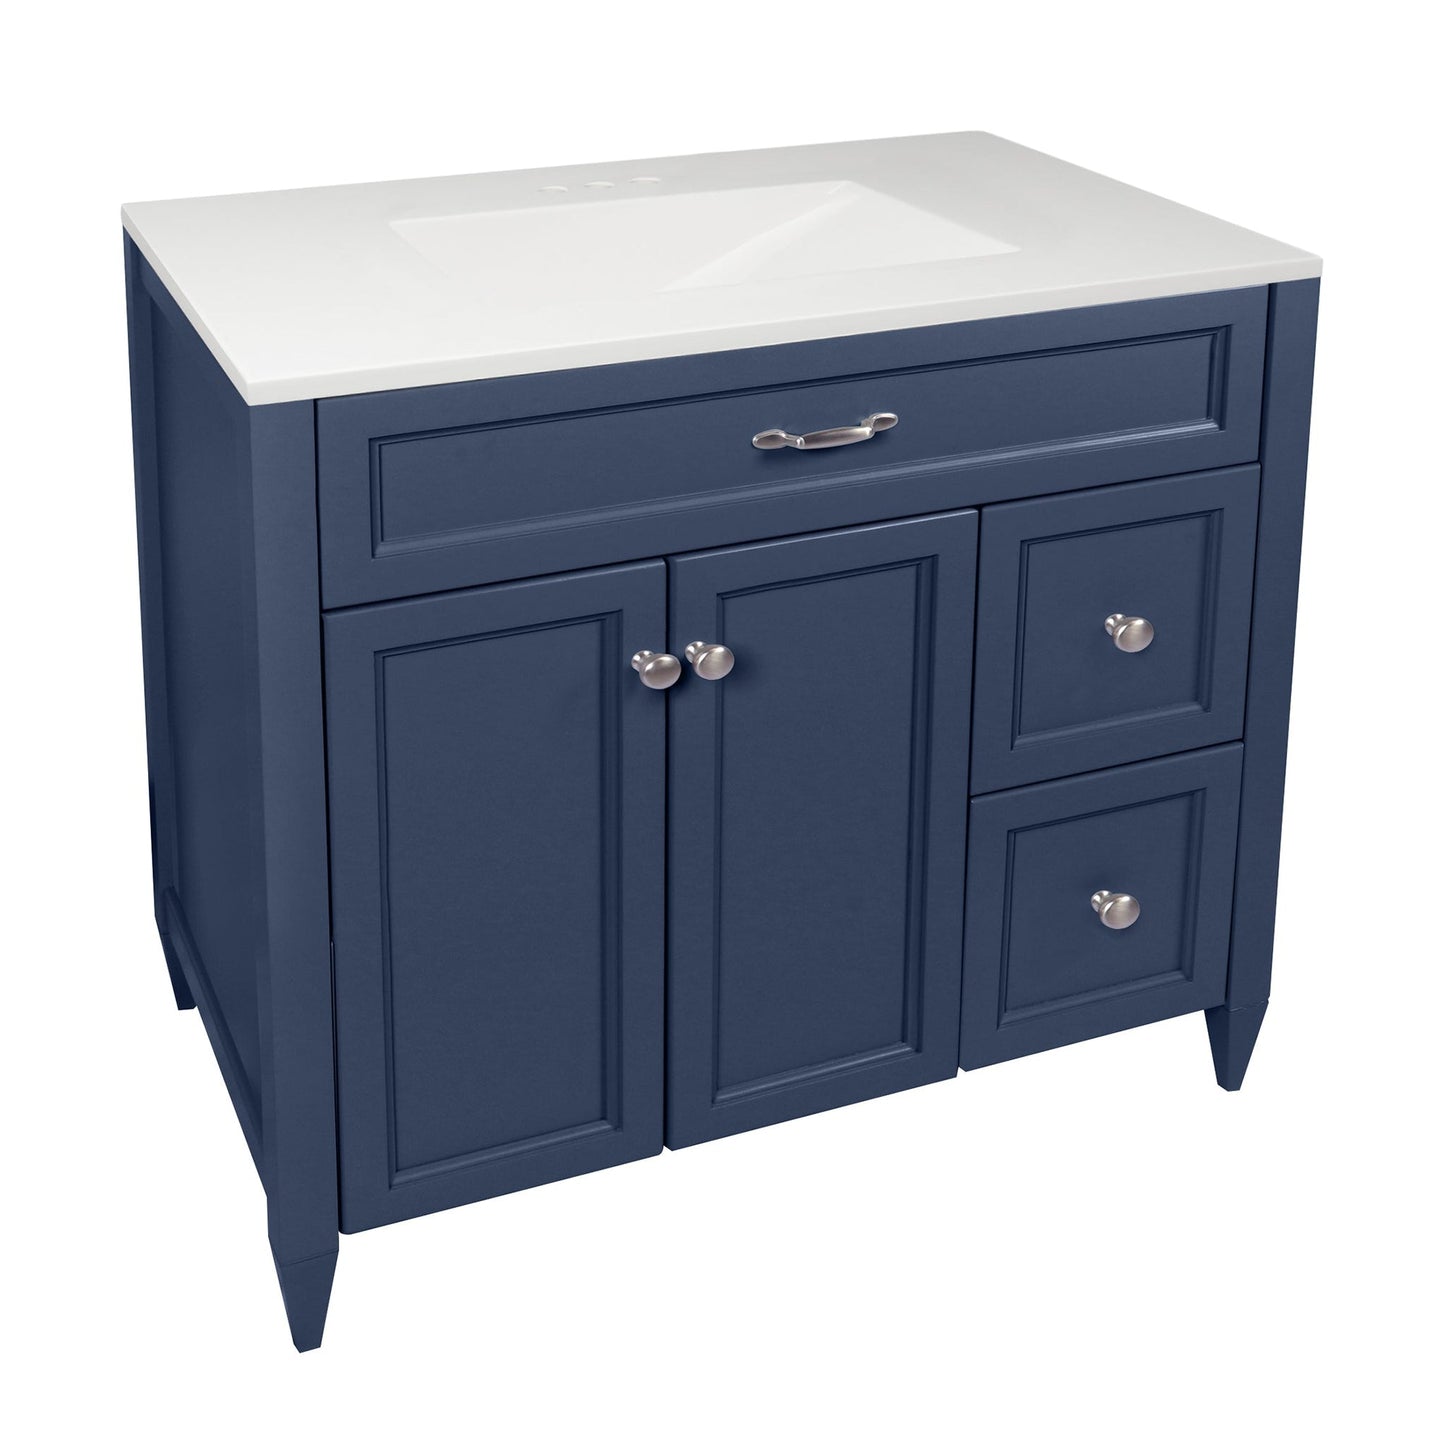 Ella’s Bubbles Vail 37" Navy Blue Bathroom Vanity With White Cultured Marble Top and Sink